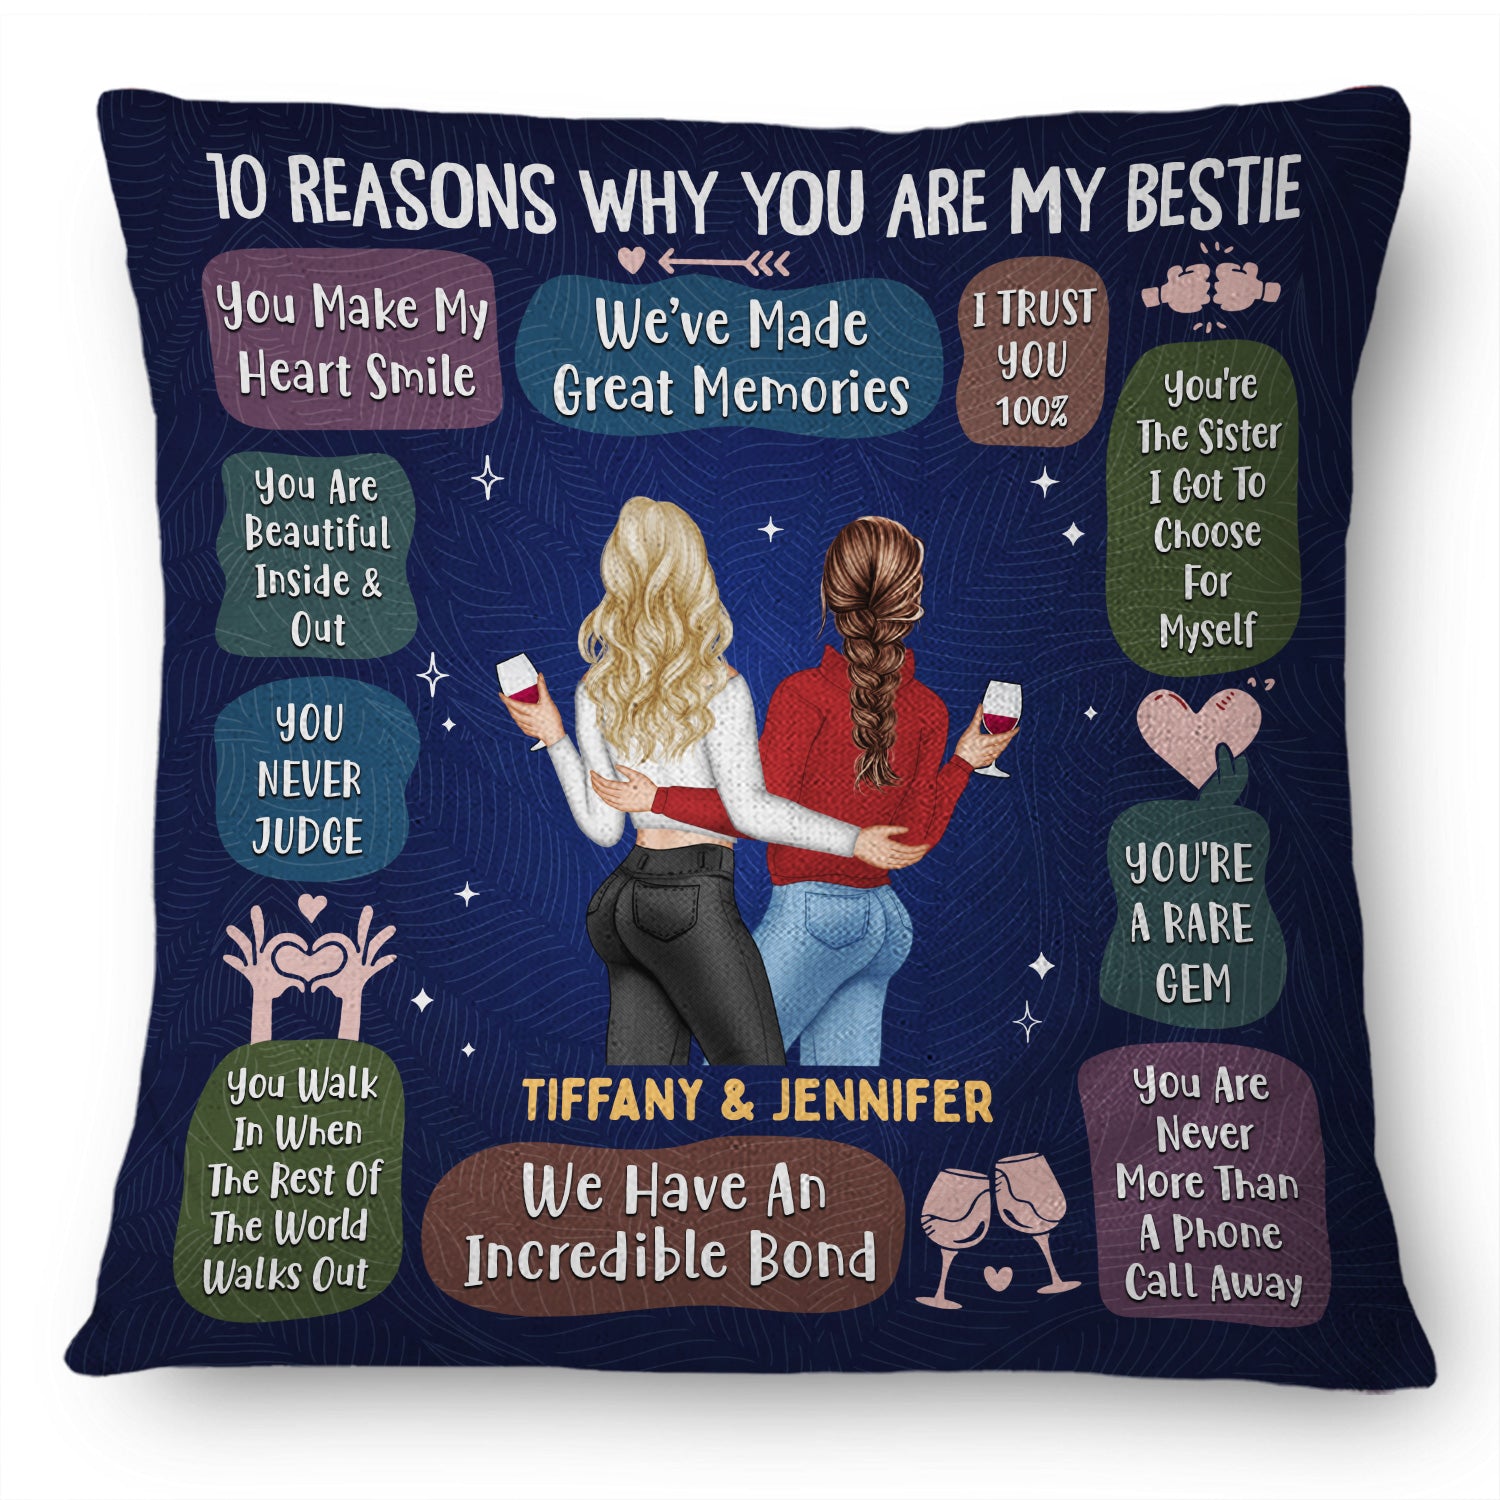 10 Reasons Why You Are My Bestie - Holiday, Birthday, Loving Gift For Friends, Colleagues - Personalized Pillow